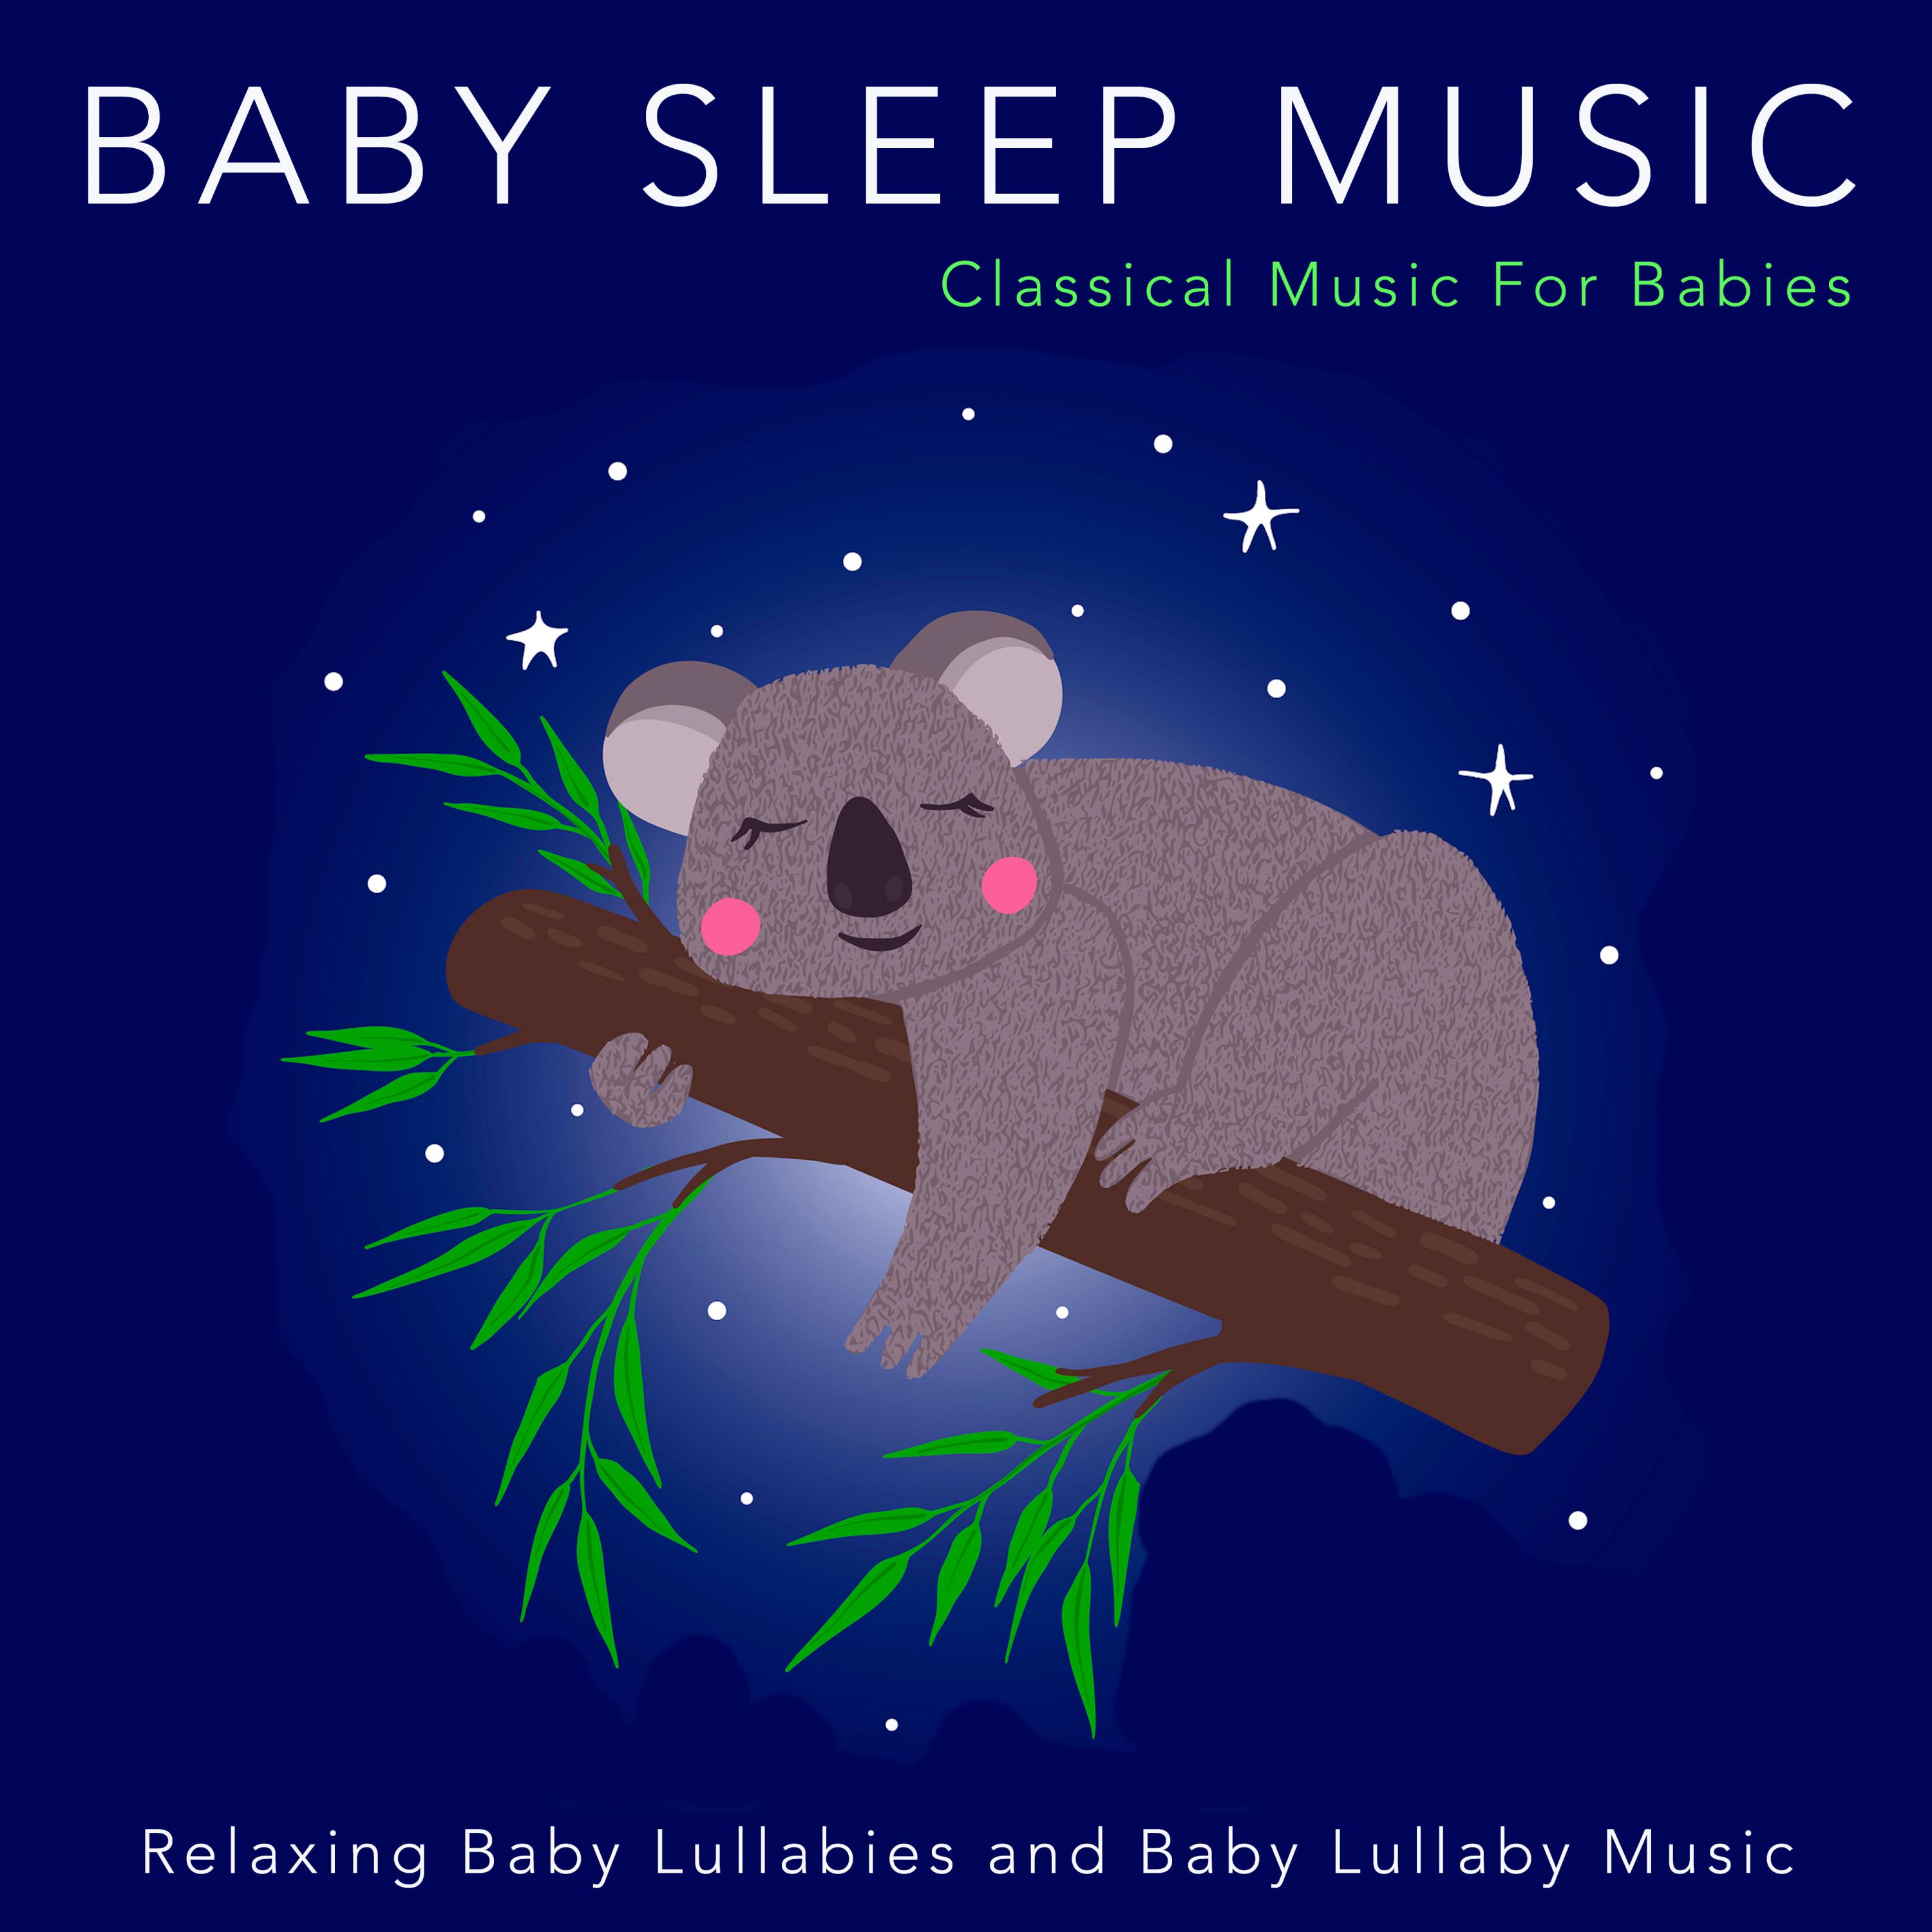 La Fille Aux Cheveux - Debussy - Classical Music For Baby Sleep - Baby Lullaby - Baby Lullabies - Rain Sounds Sleep Aid